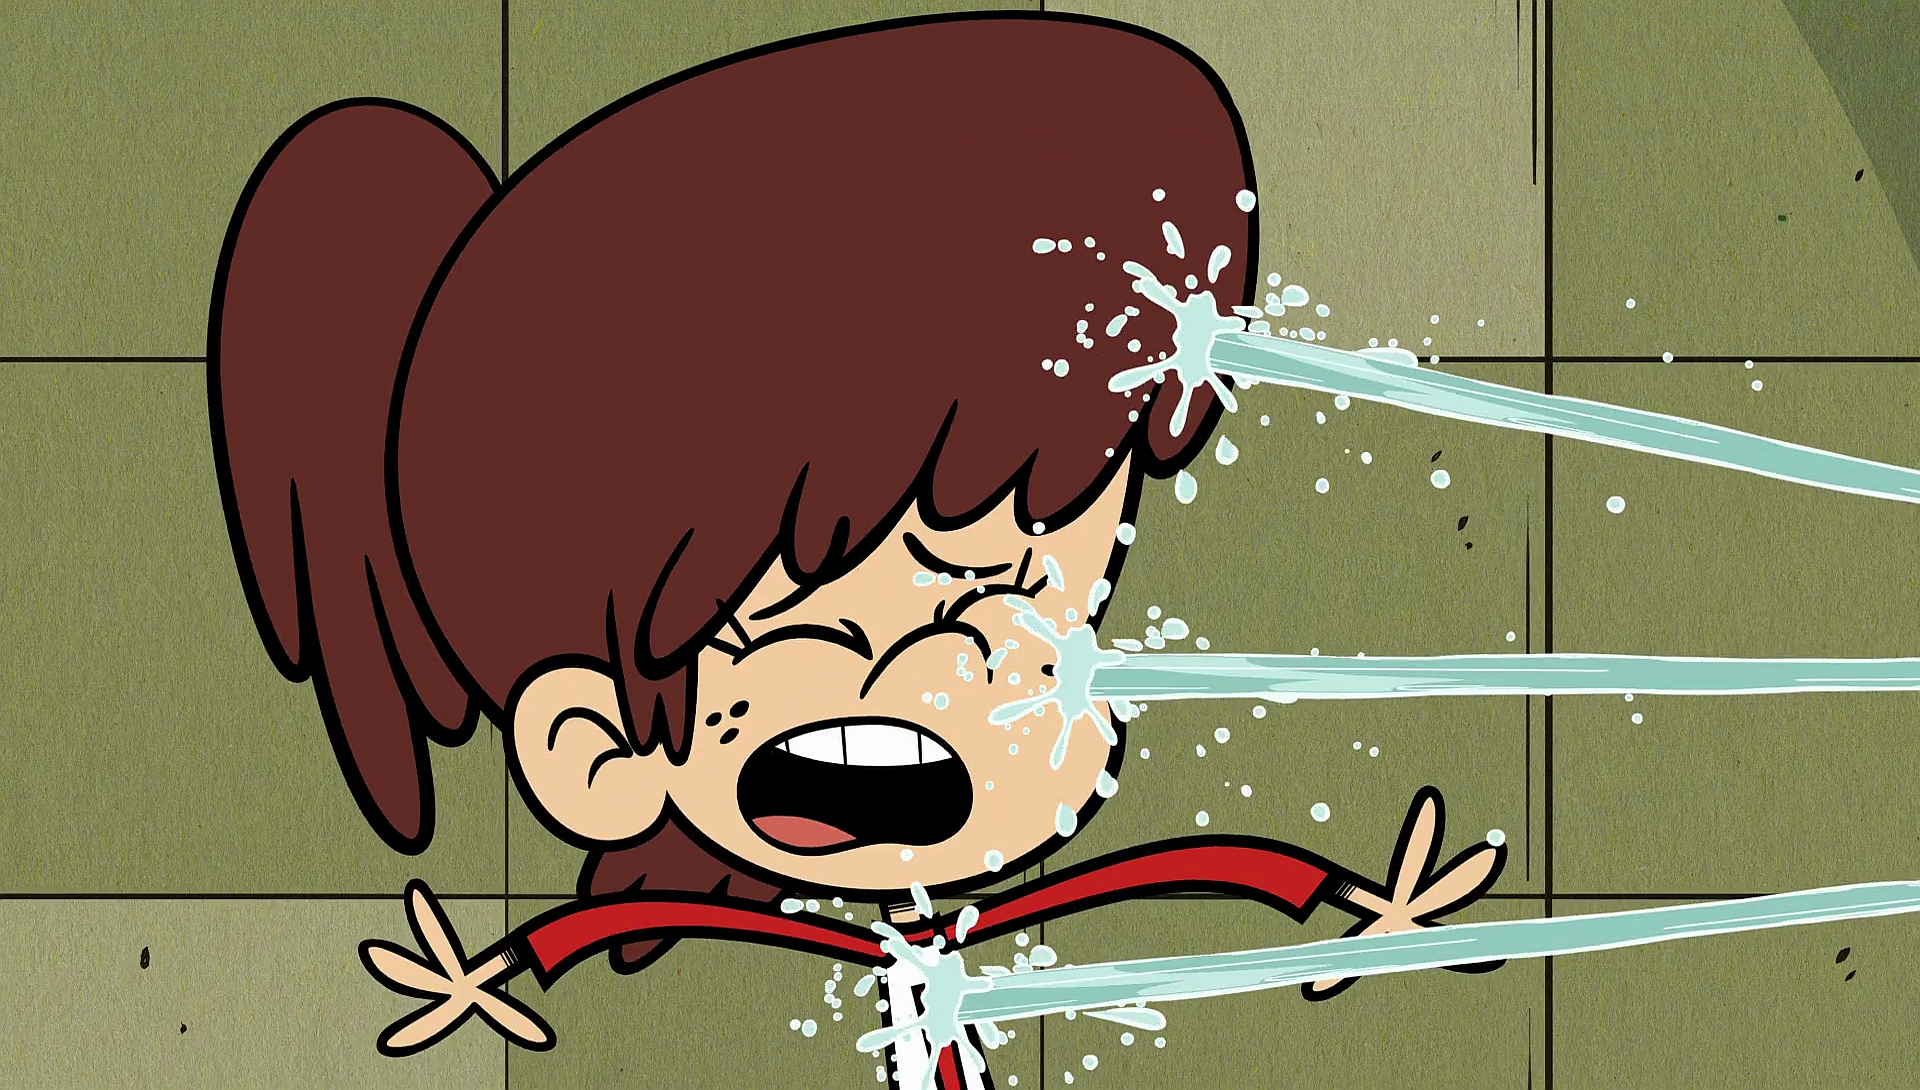 Image S2e04a Lynn In The Showerpng The Loud House Encyclopedia Fandom Powered By Wikia 